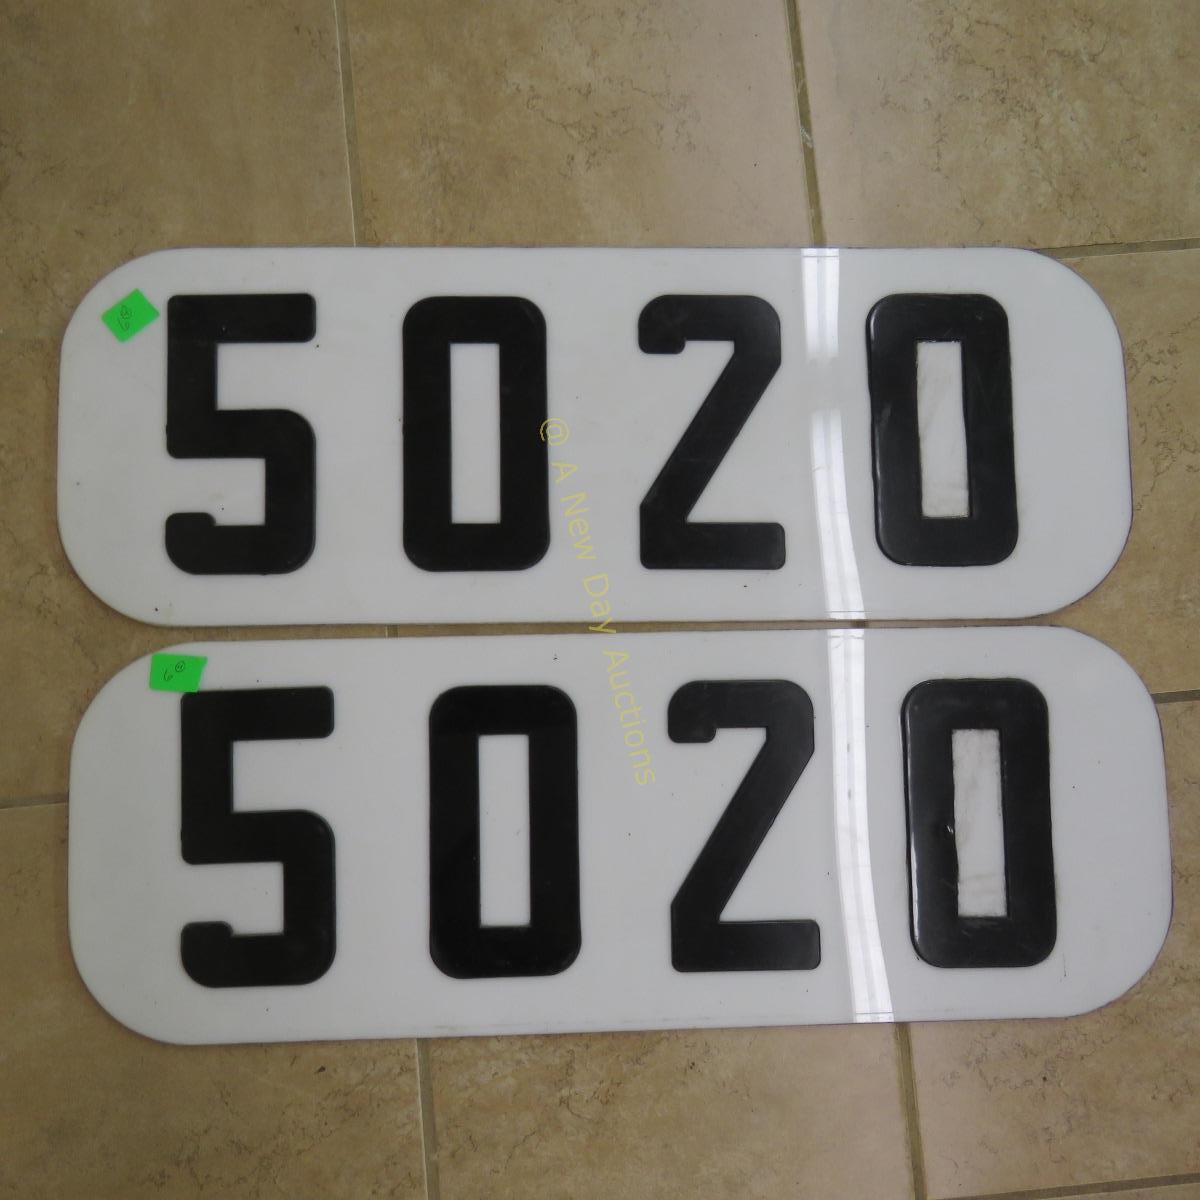 4 Number Boards- 5020 (2), 26 (2) Milwaukee Rd